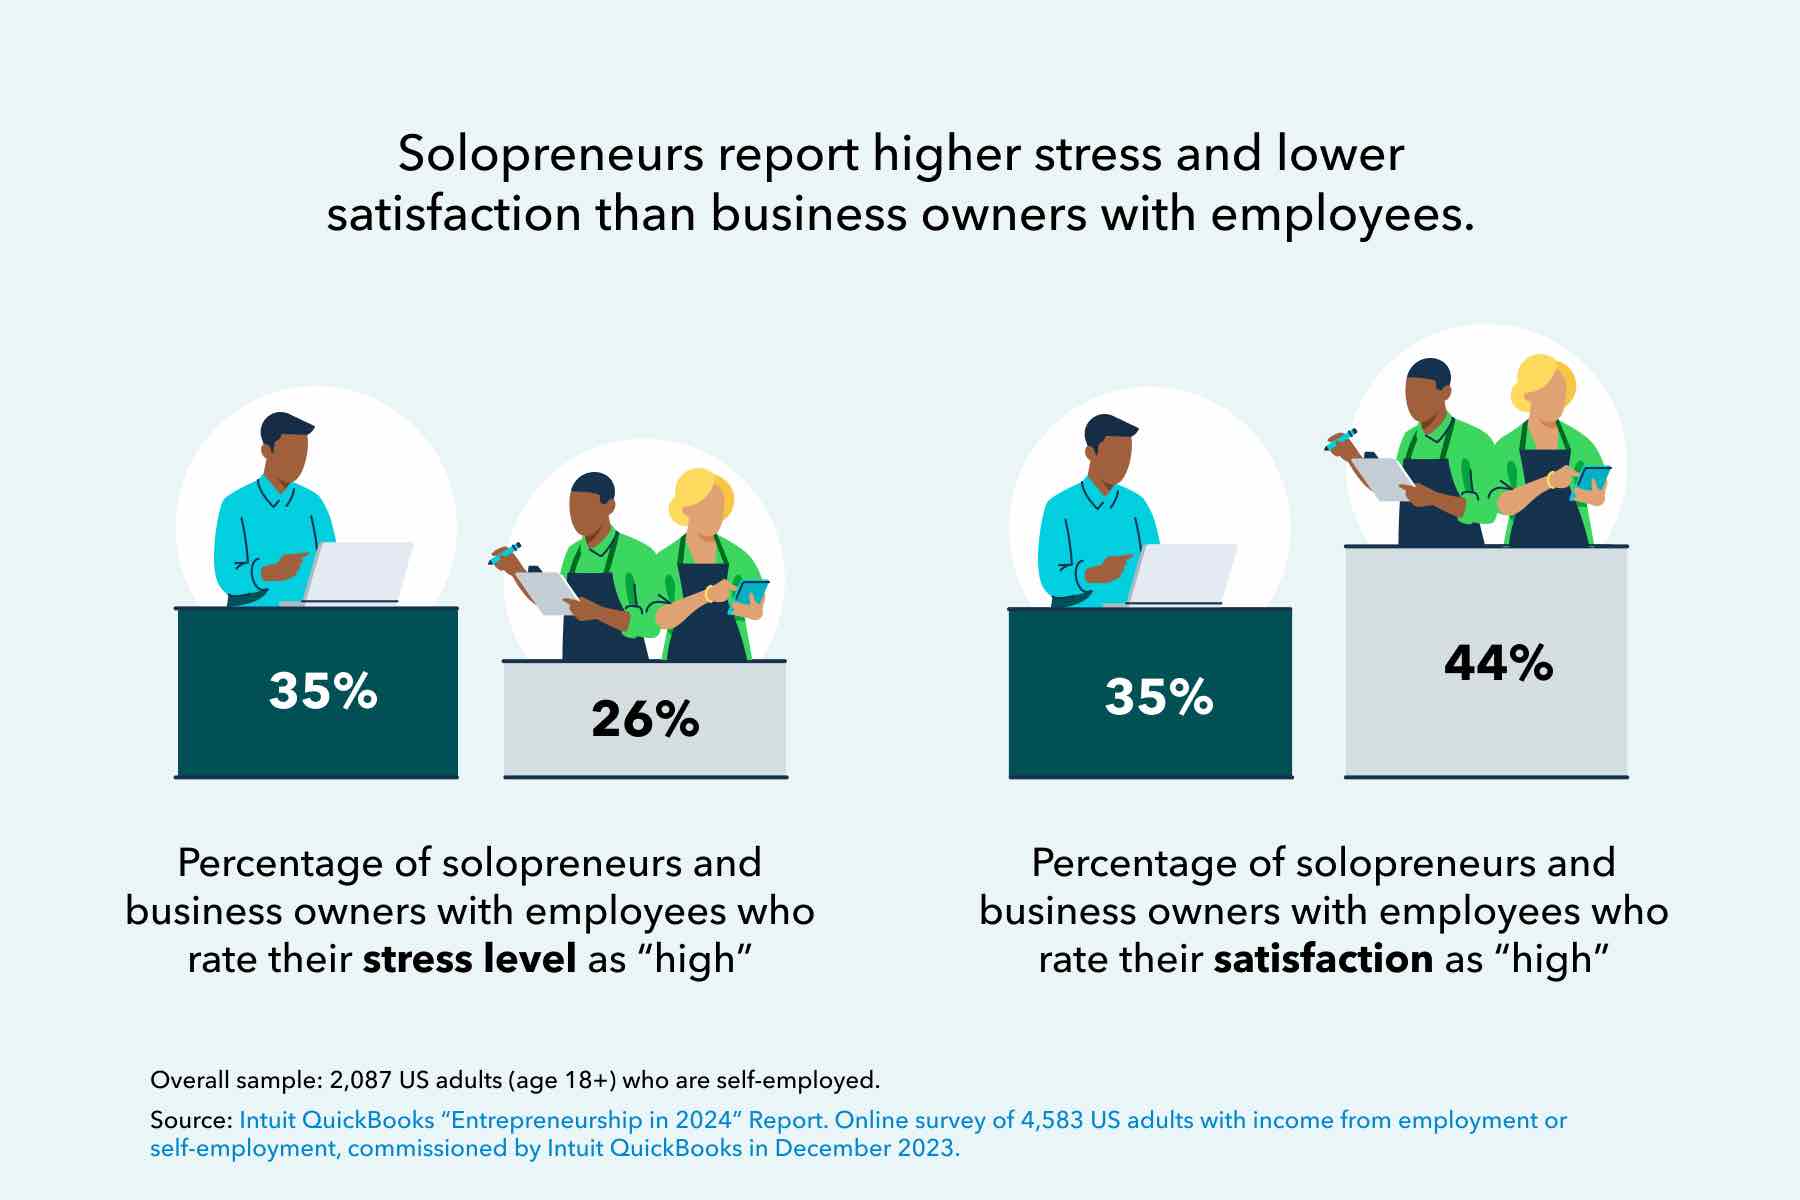 Solopreneurs report higher stress and lower satisfaction than business owners with employees